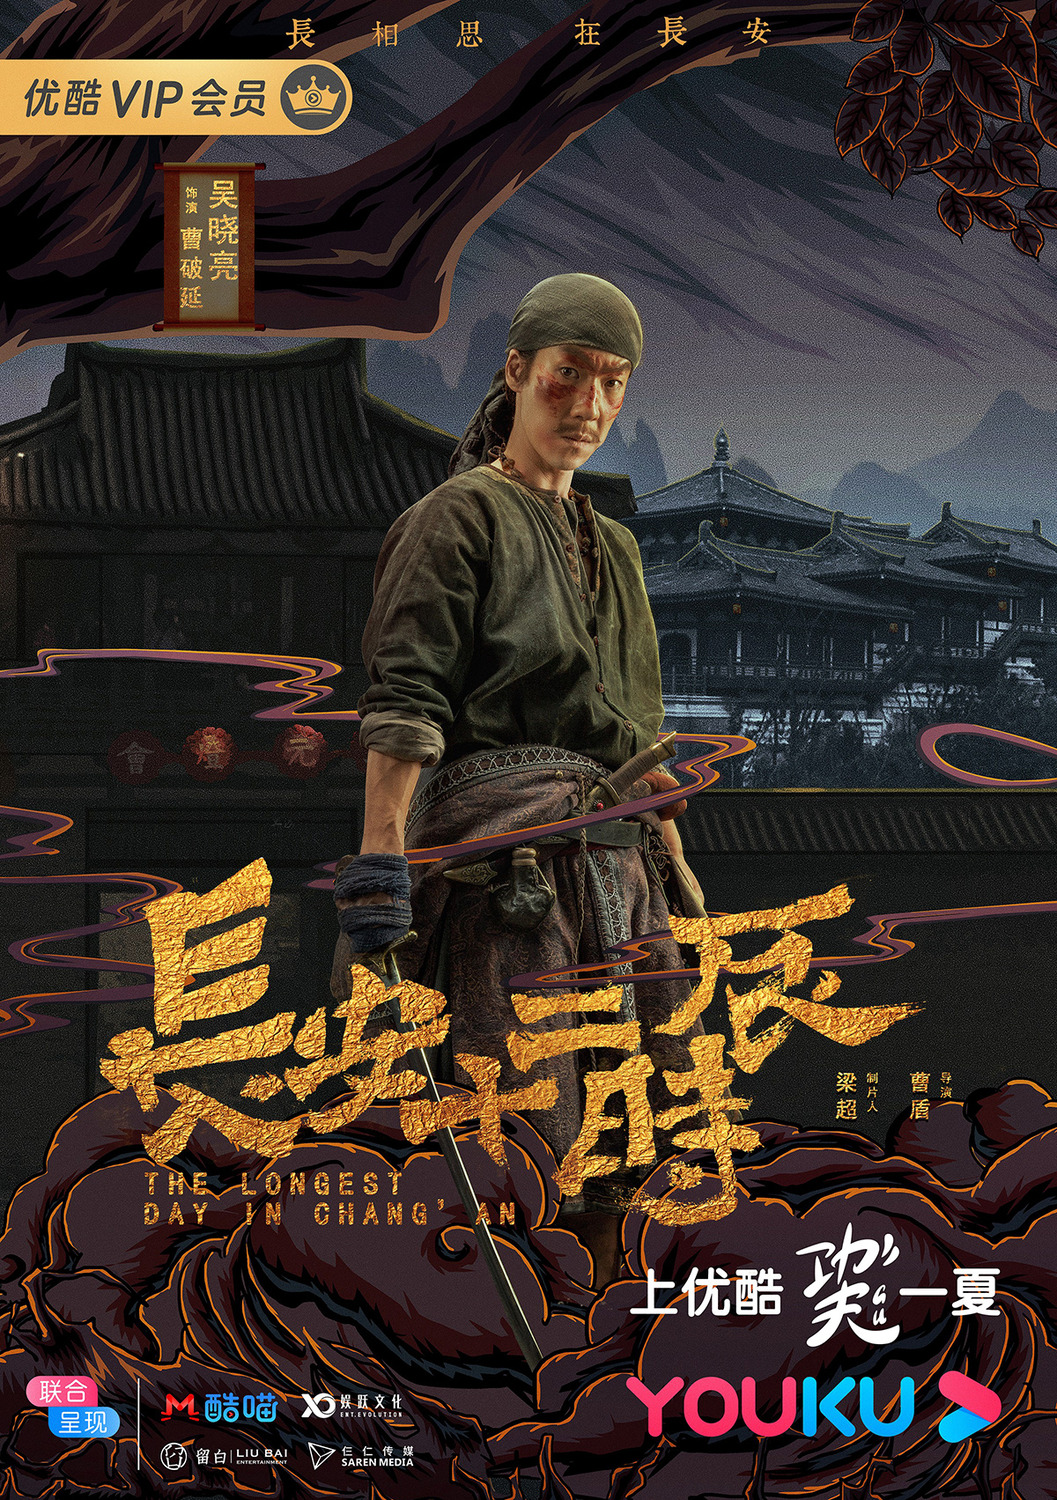 Extra Large TV Poster Image for Chang'an shi er shi chen (#3 of 18)